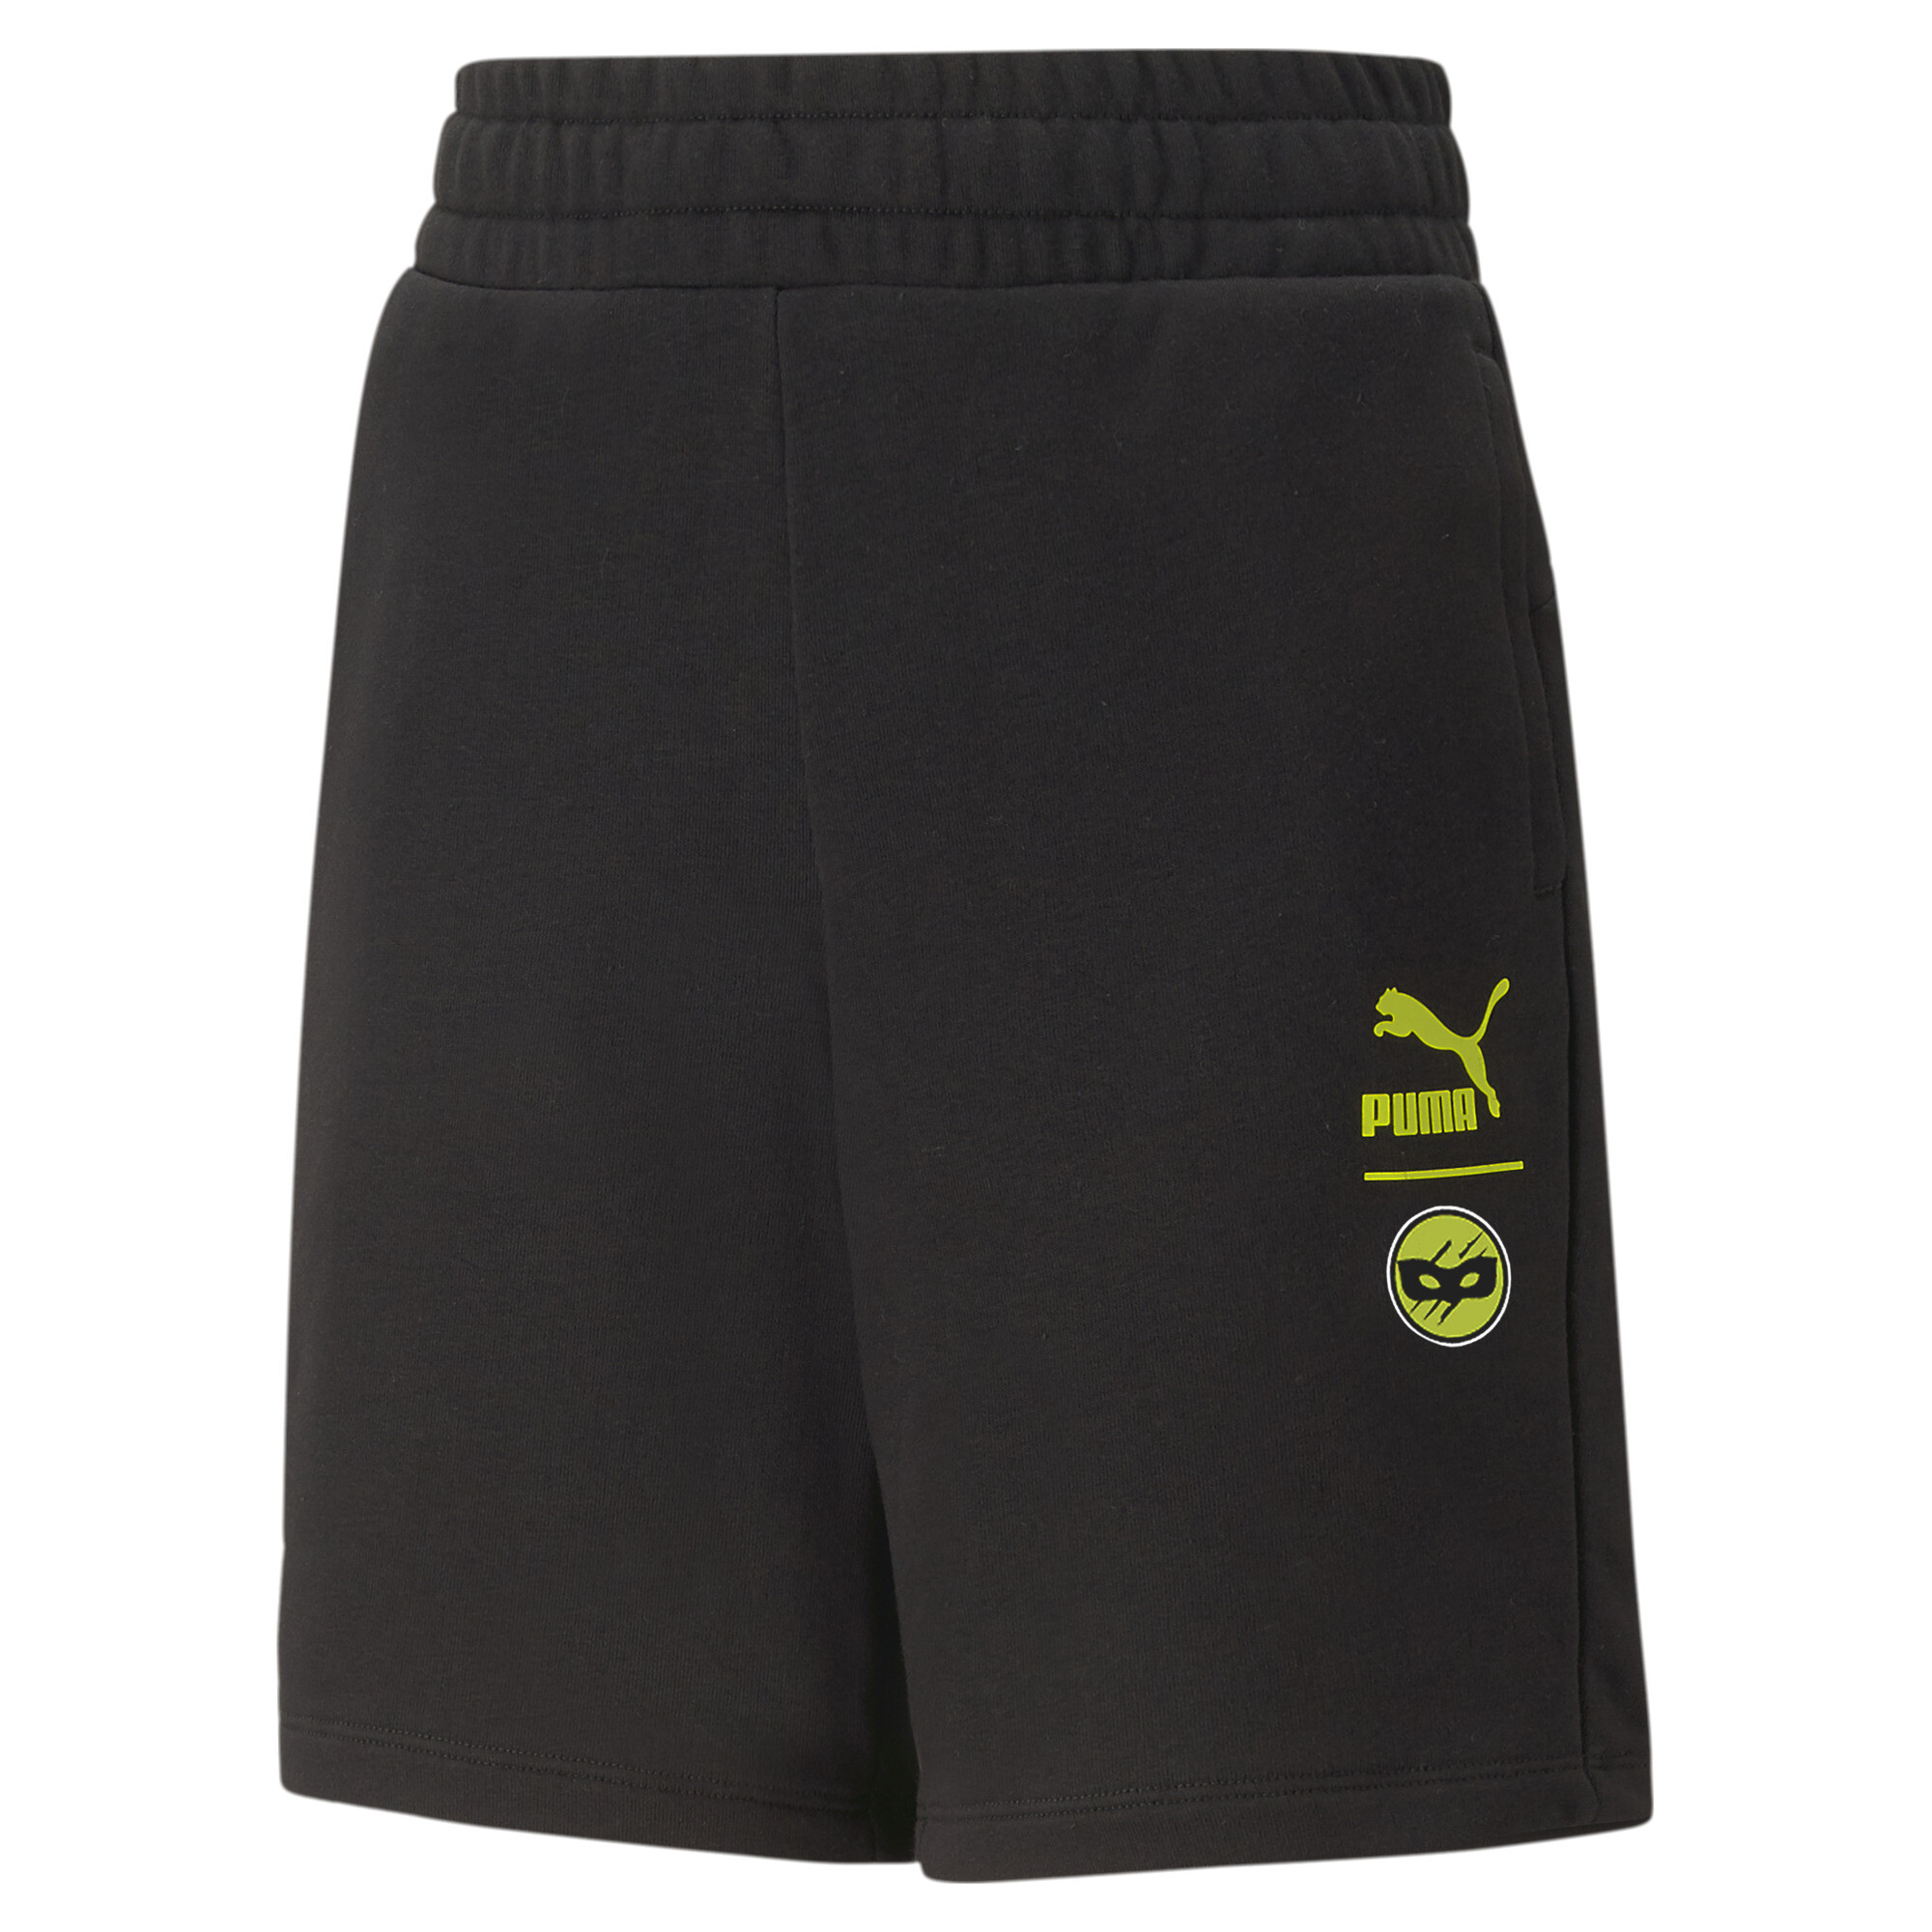 PUMA X MIRACULOUS Shorts In Black, Size 11-12 Youth